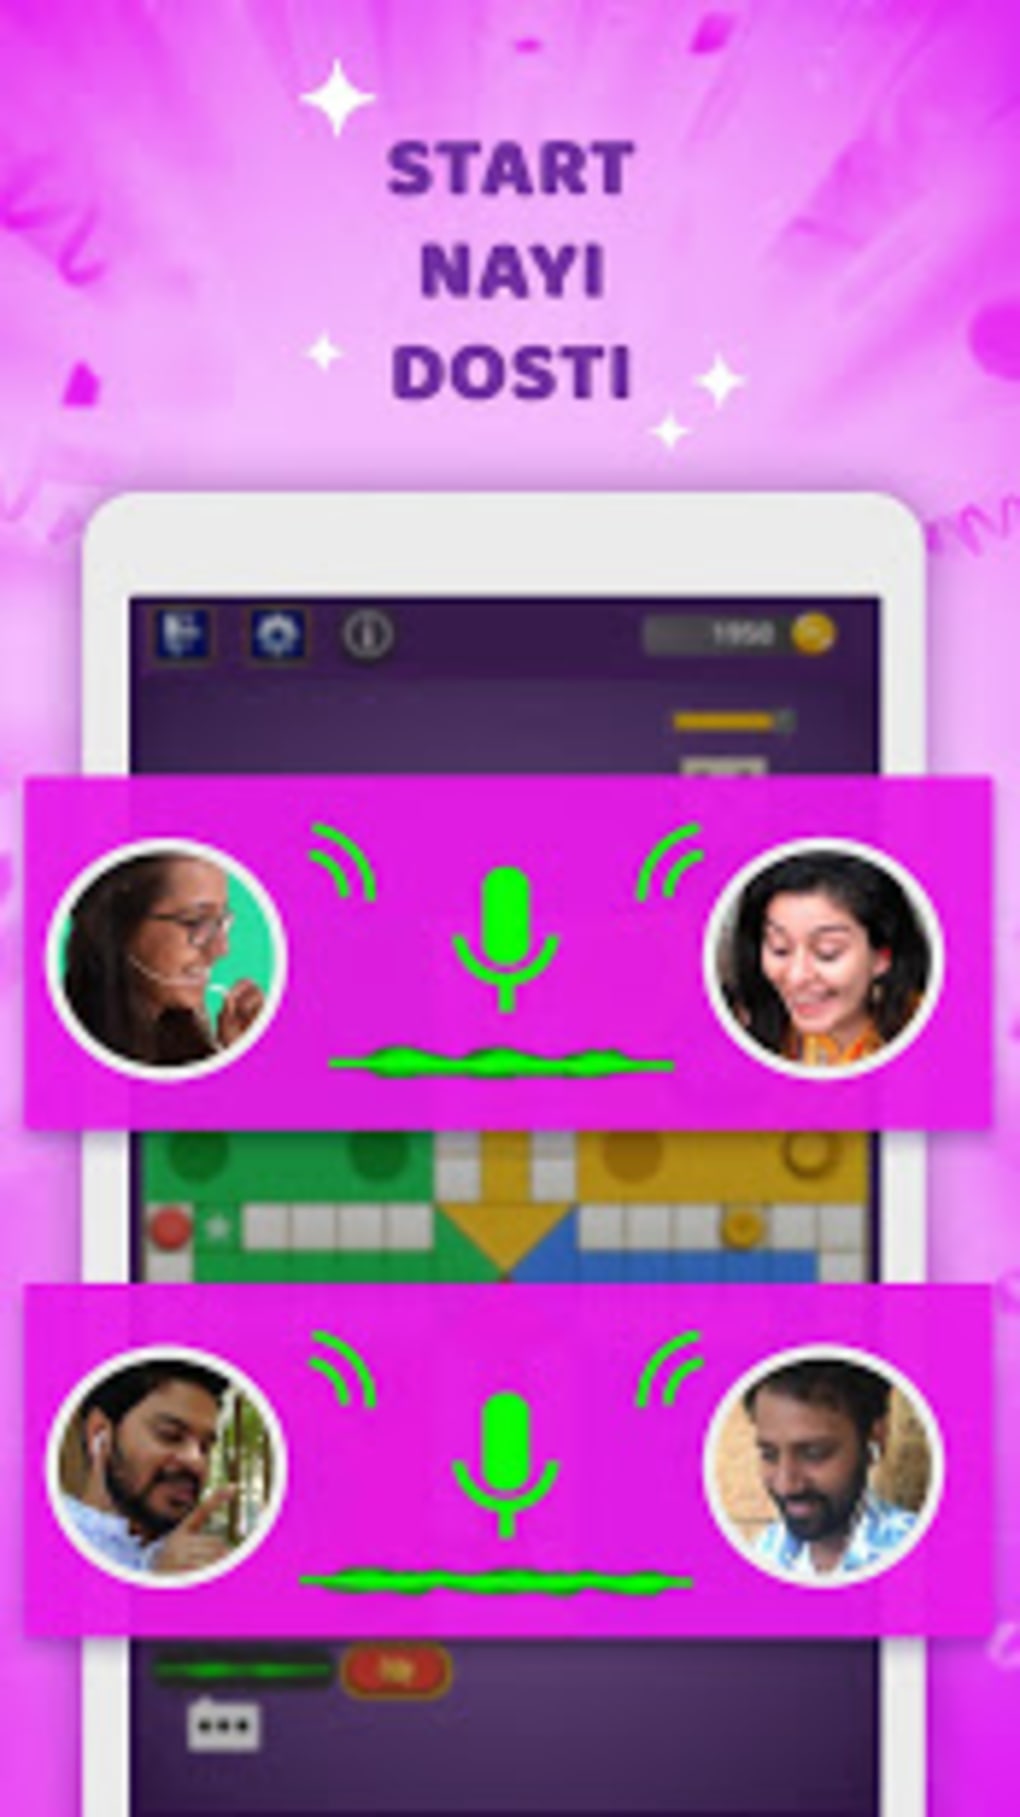 Hello Ludo- Live online Chat on star ludo game APK for Android - Download